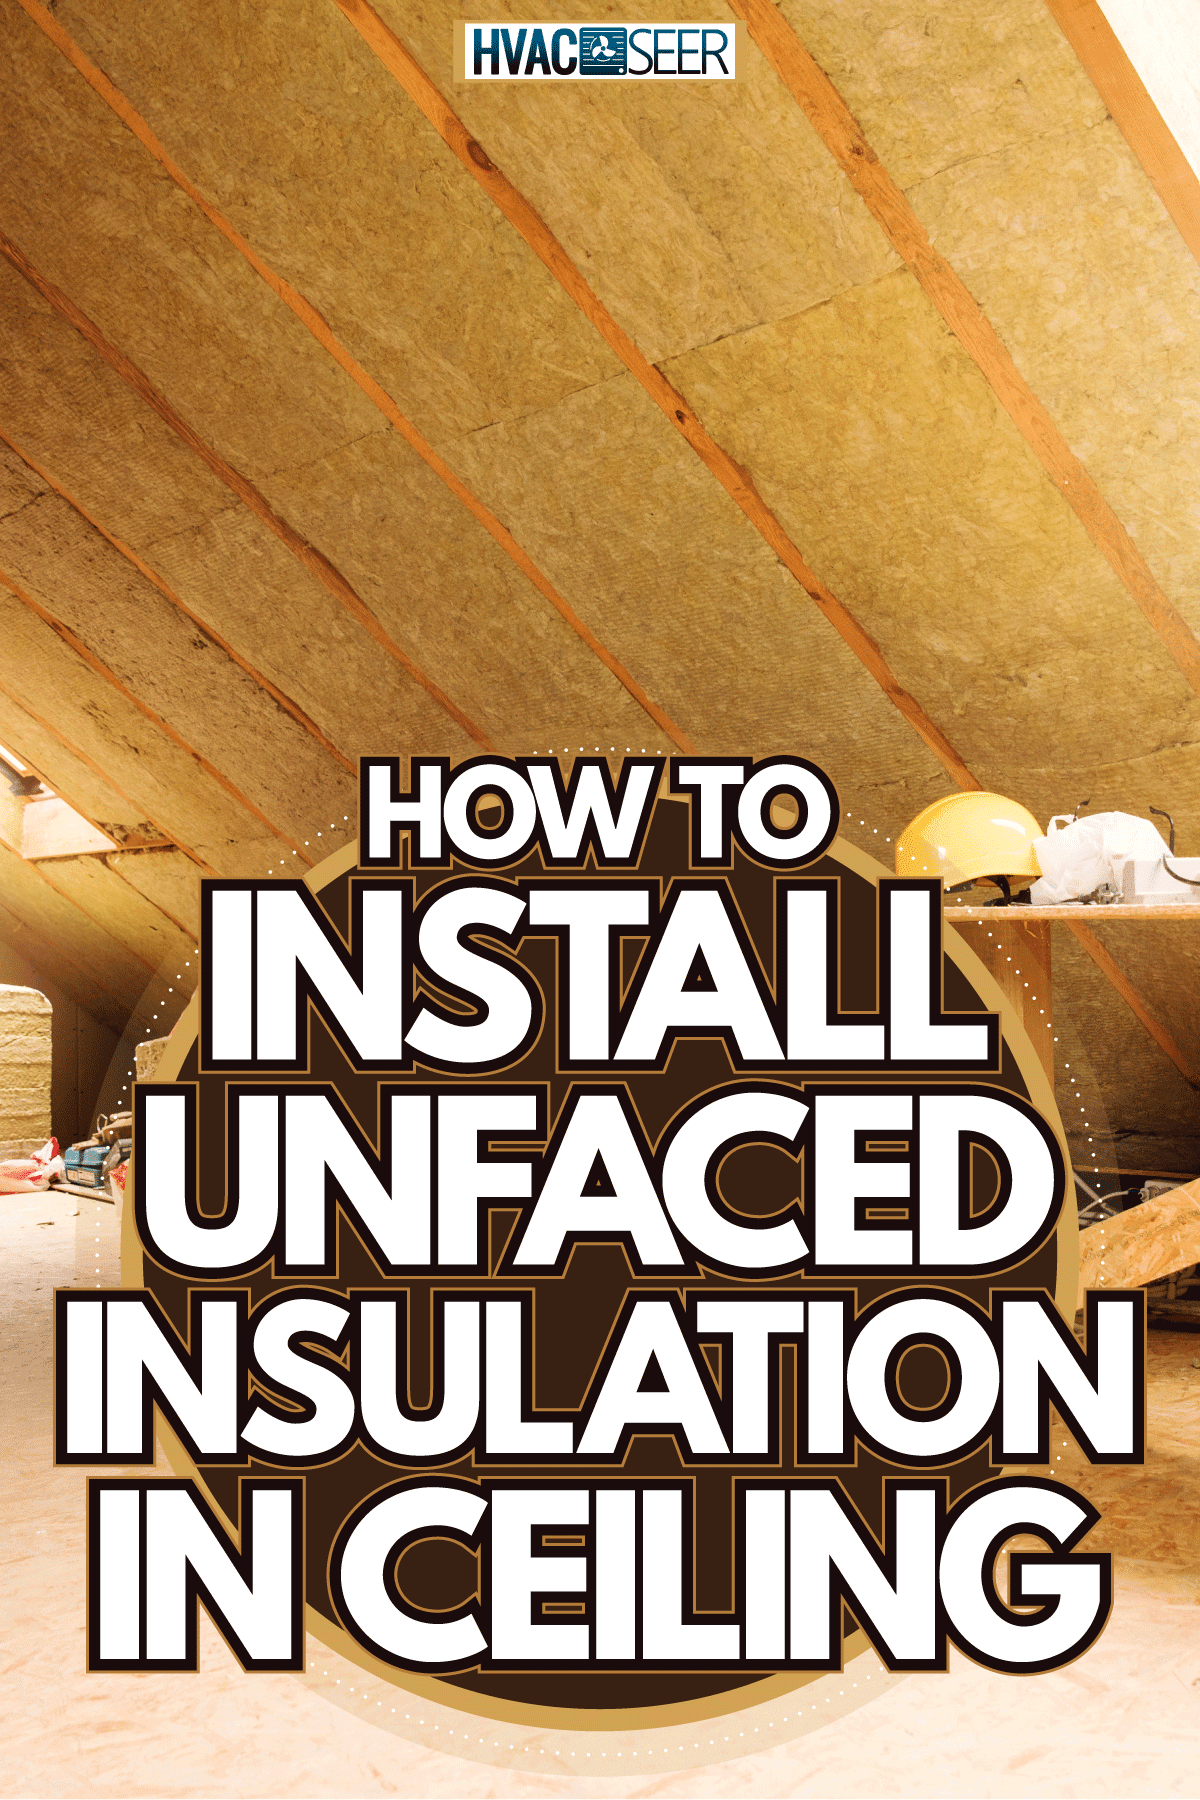 Interior of an attic with mineral insulation and other construction equipment's, How To Install Unfaced Insulation In Ceiling